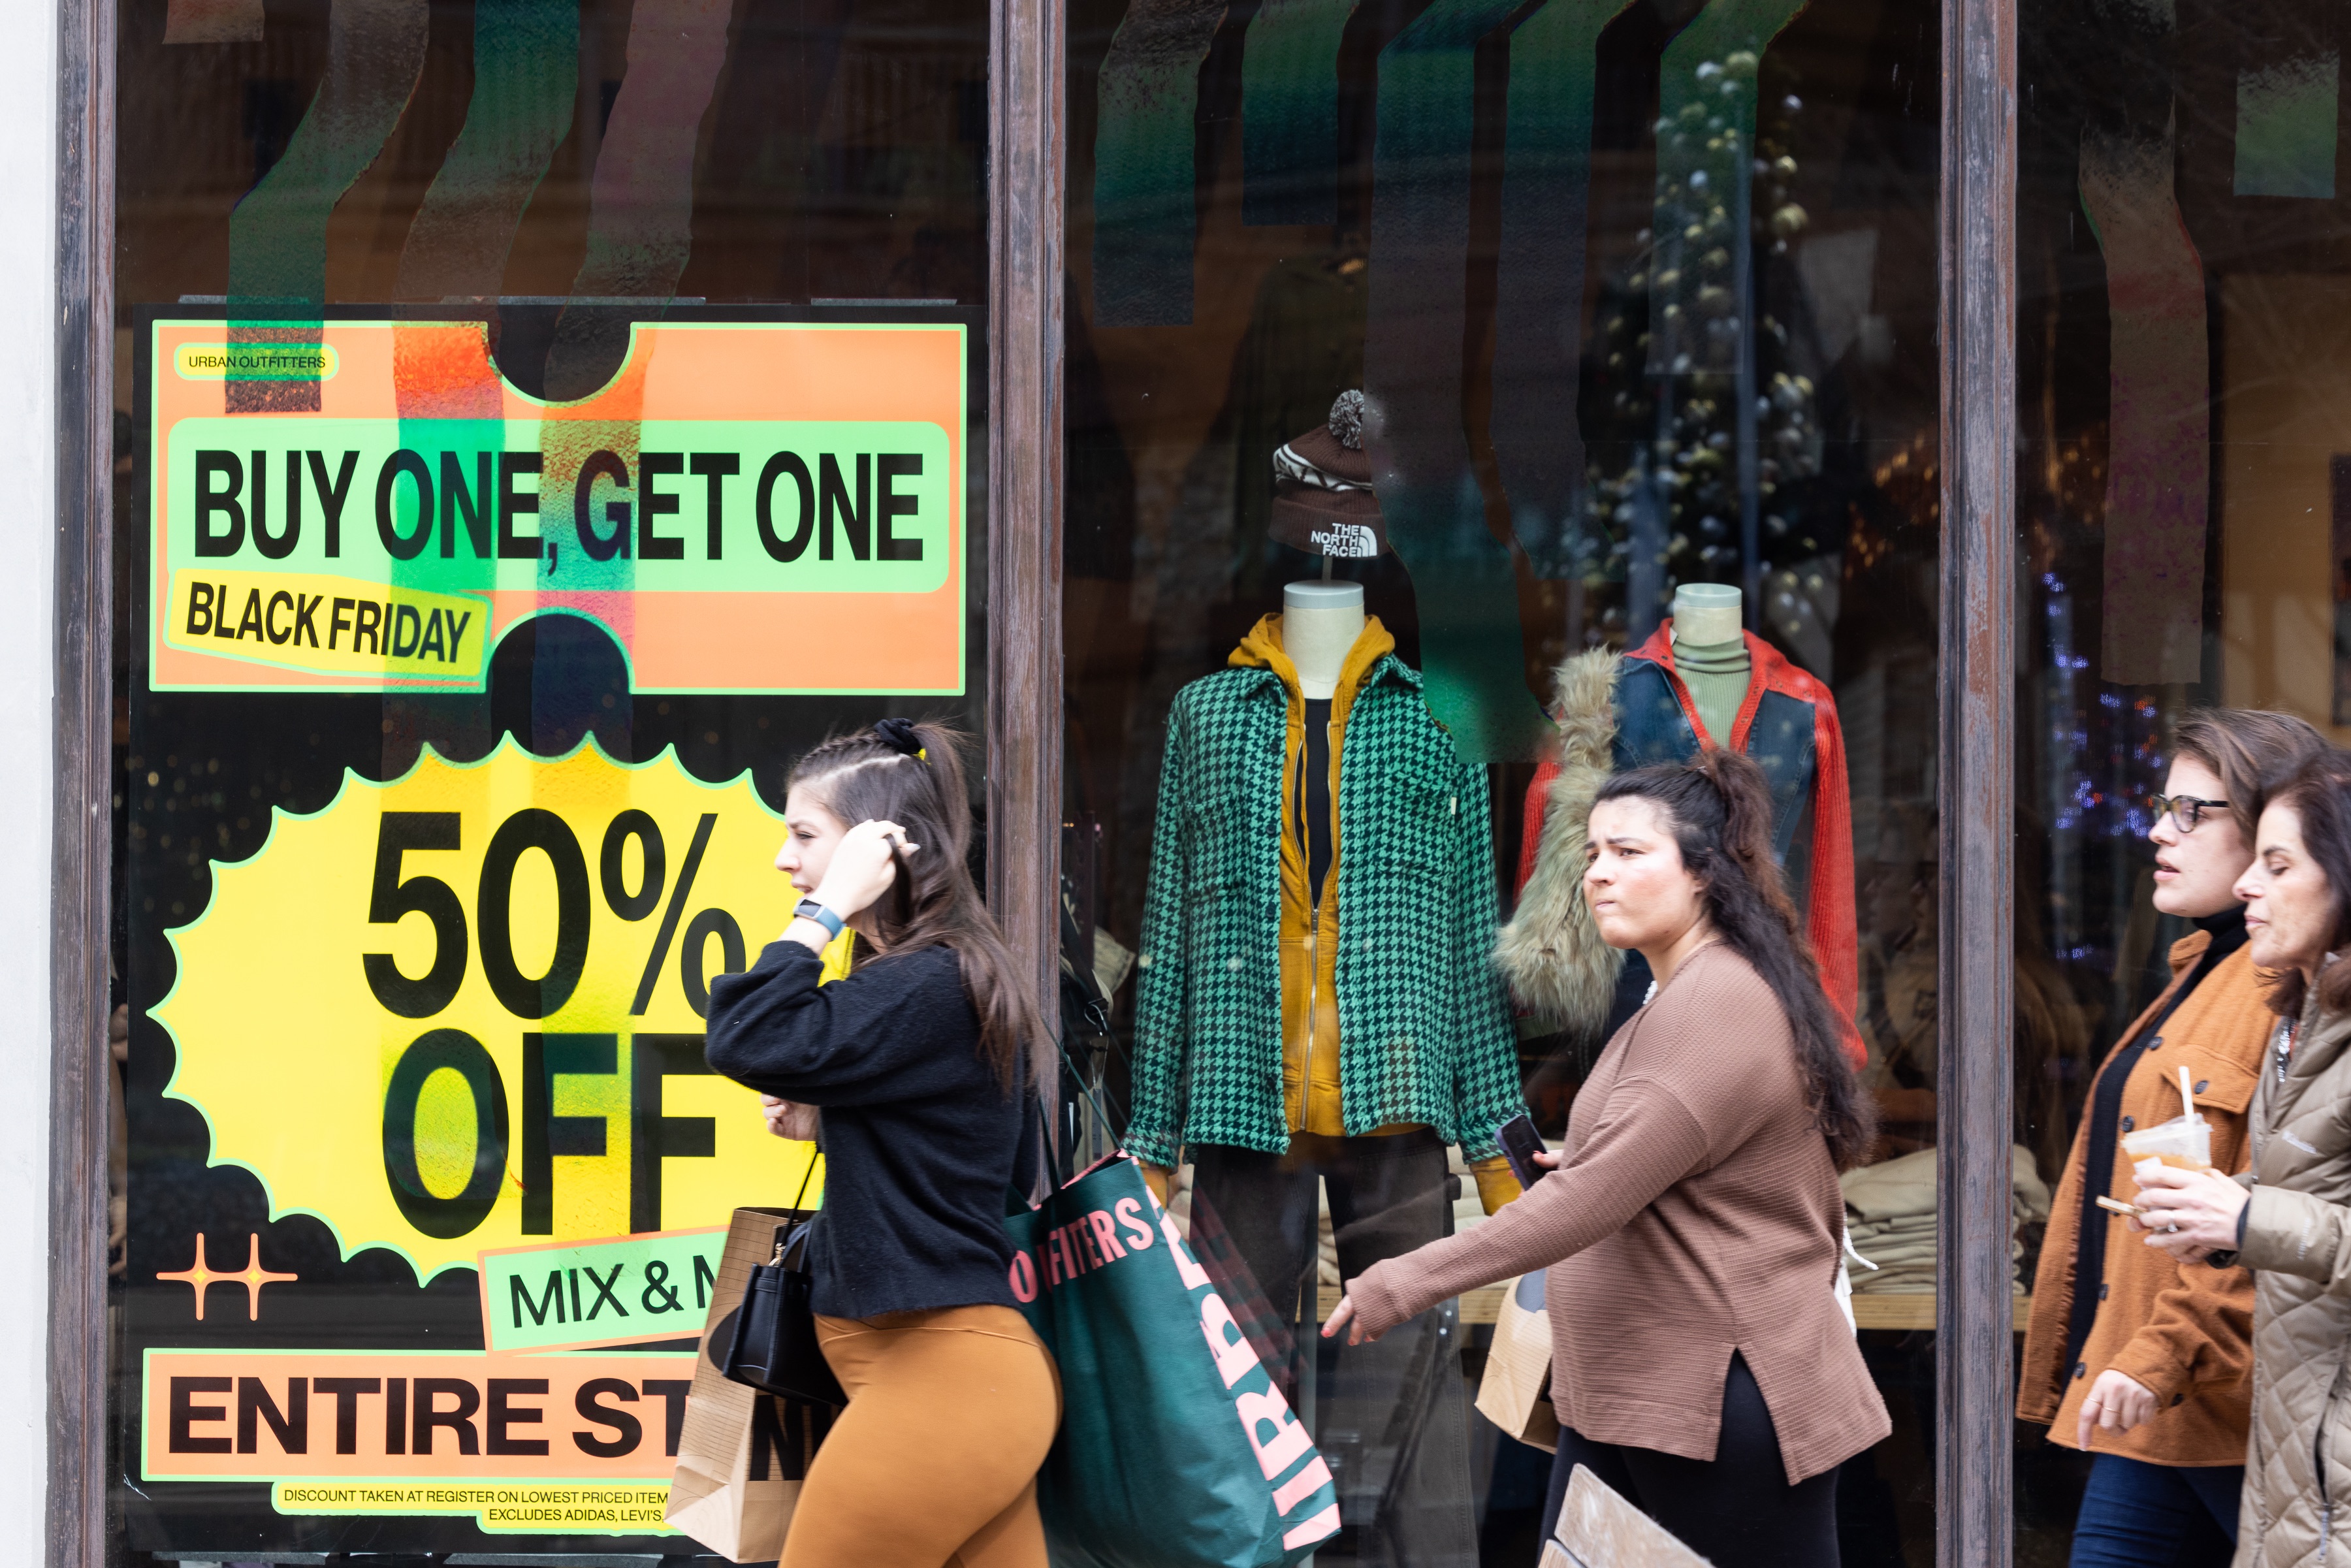 US Retailers, Consumers Brace for Unusual Holiday Shopping Season